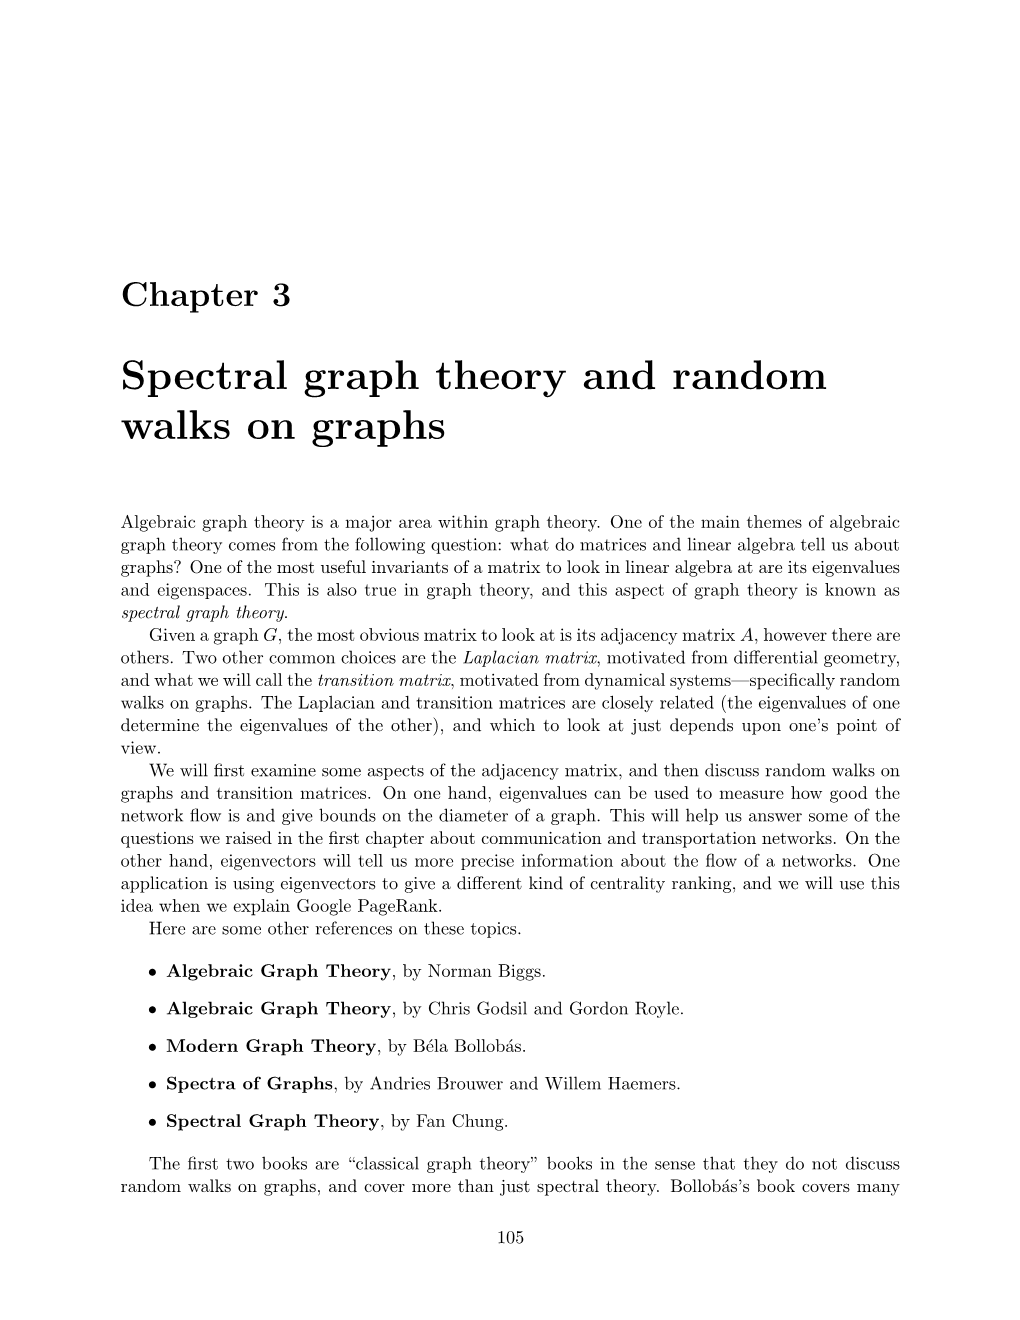 Chapter 3 -- Spectral Graph Theory and Random Walks